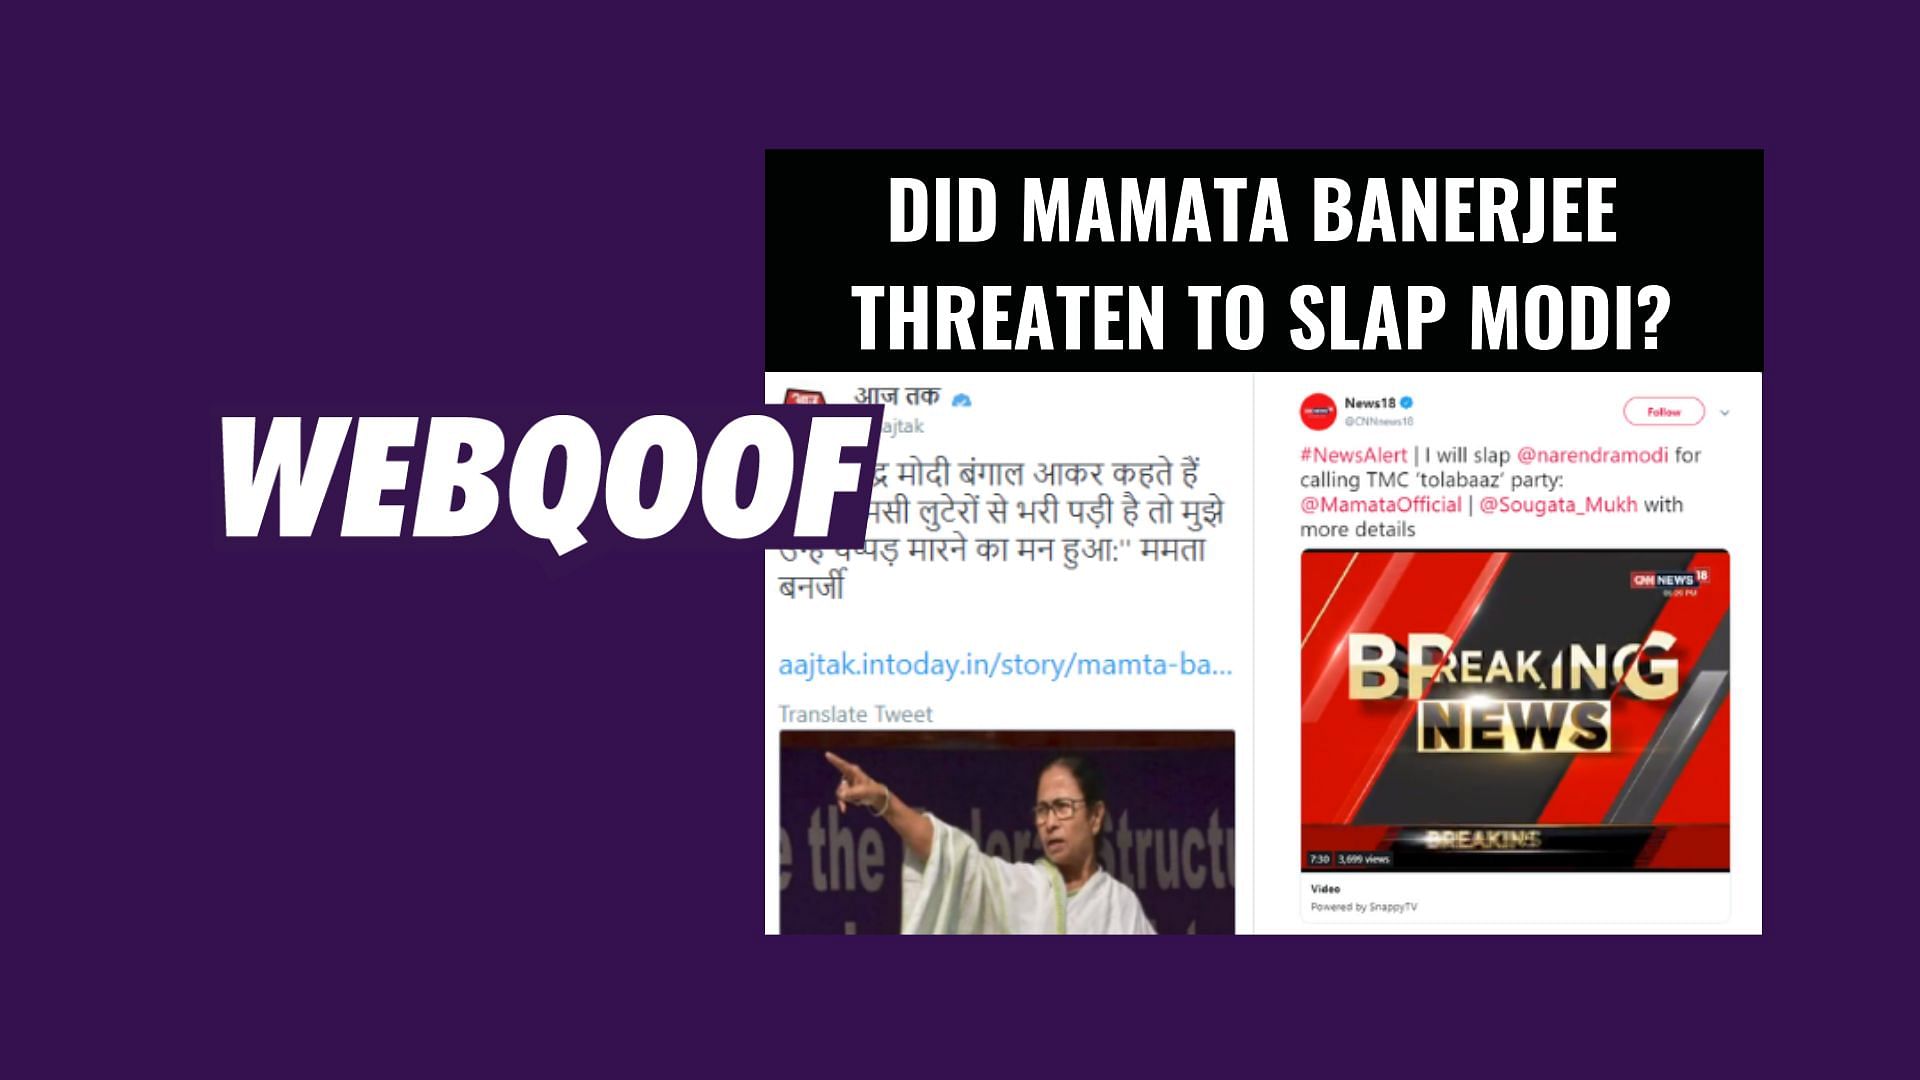 Various media organisations misquoted West Bengal CM Mamata Banerjee and claimed that she wanted to slap PM Modi.